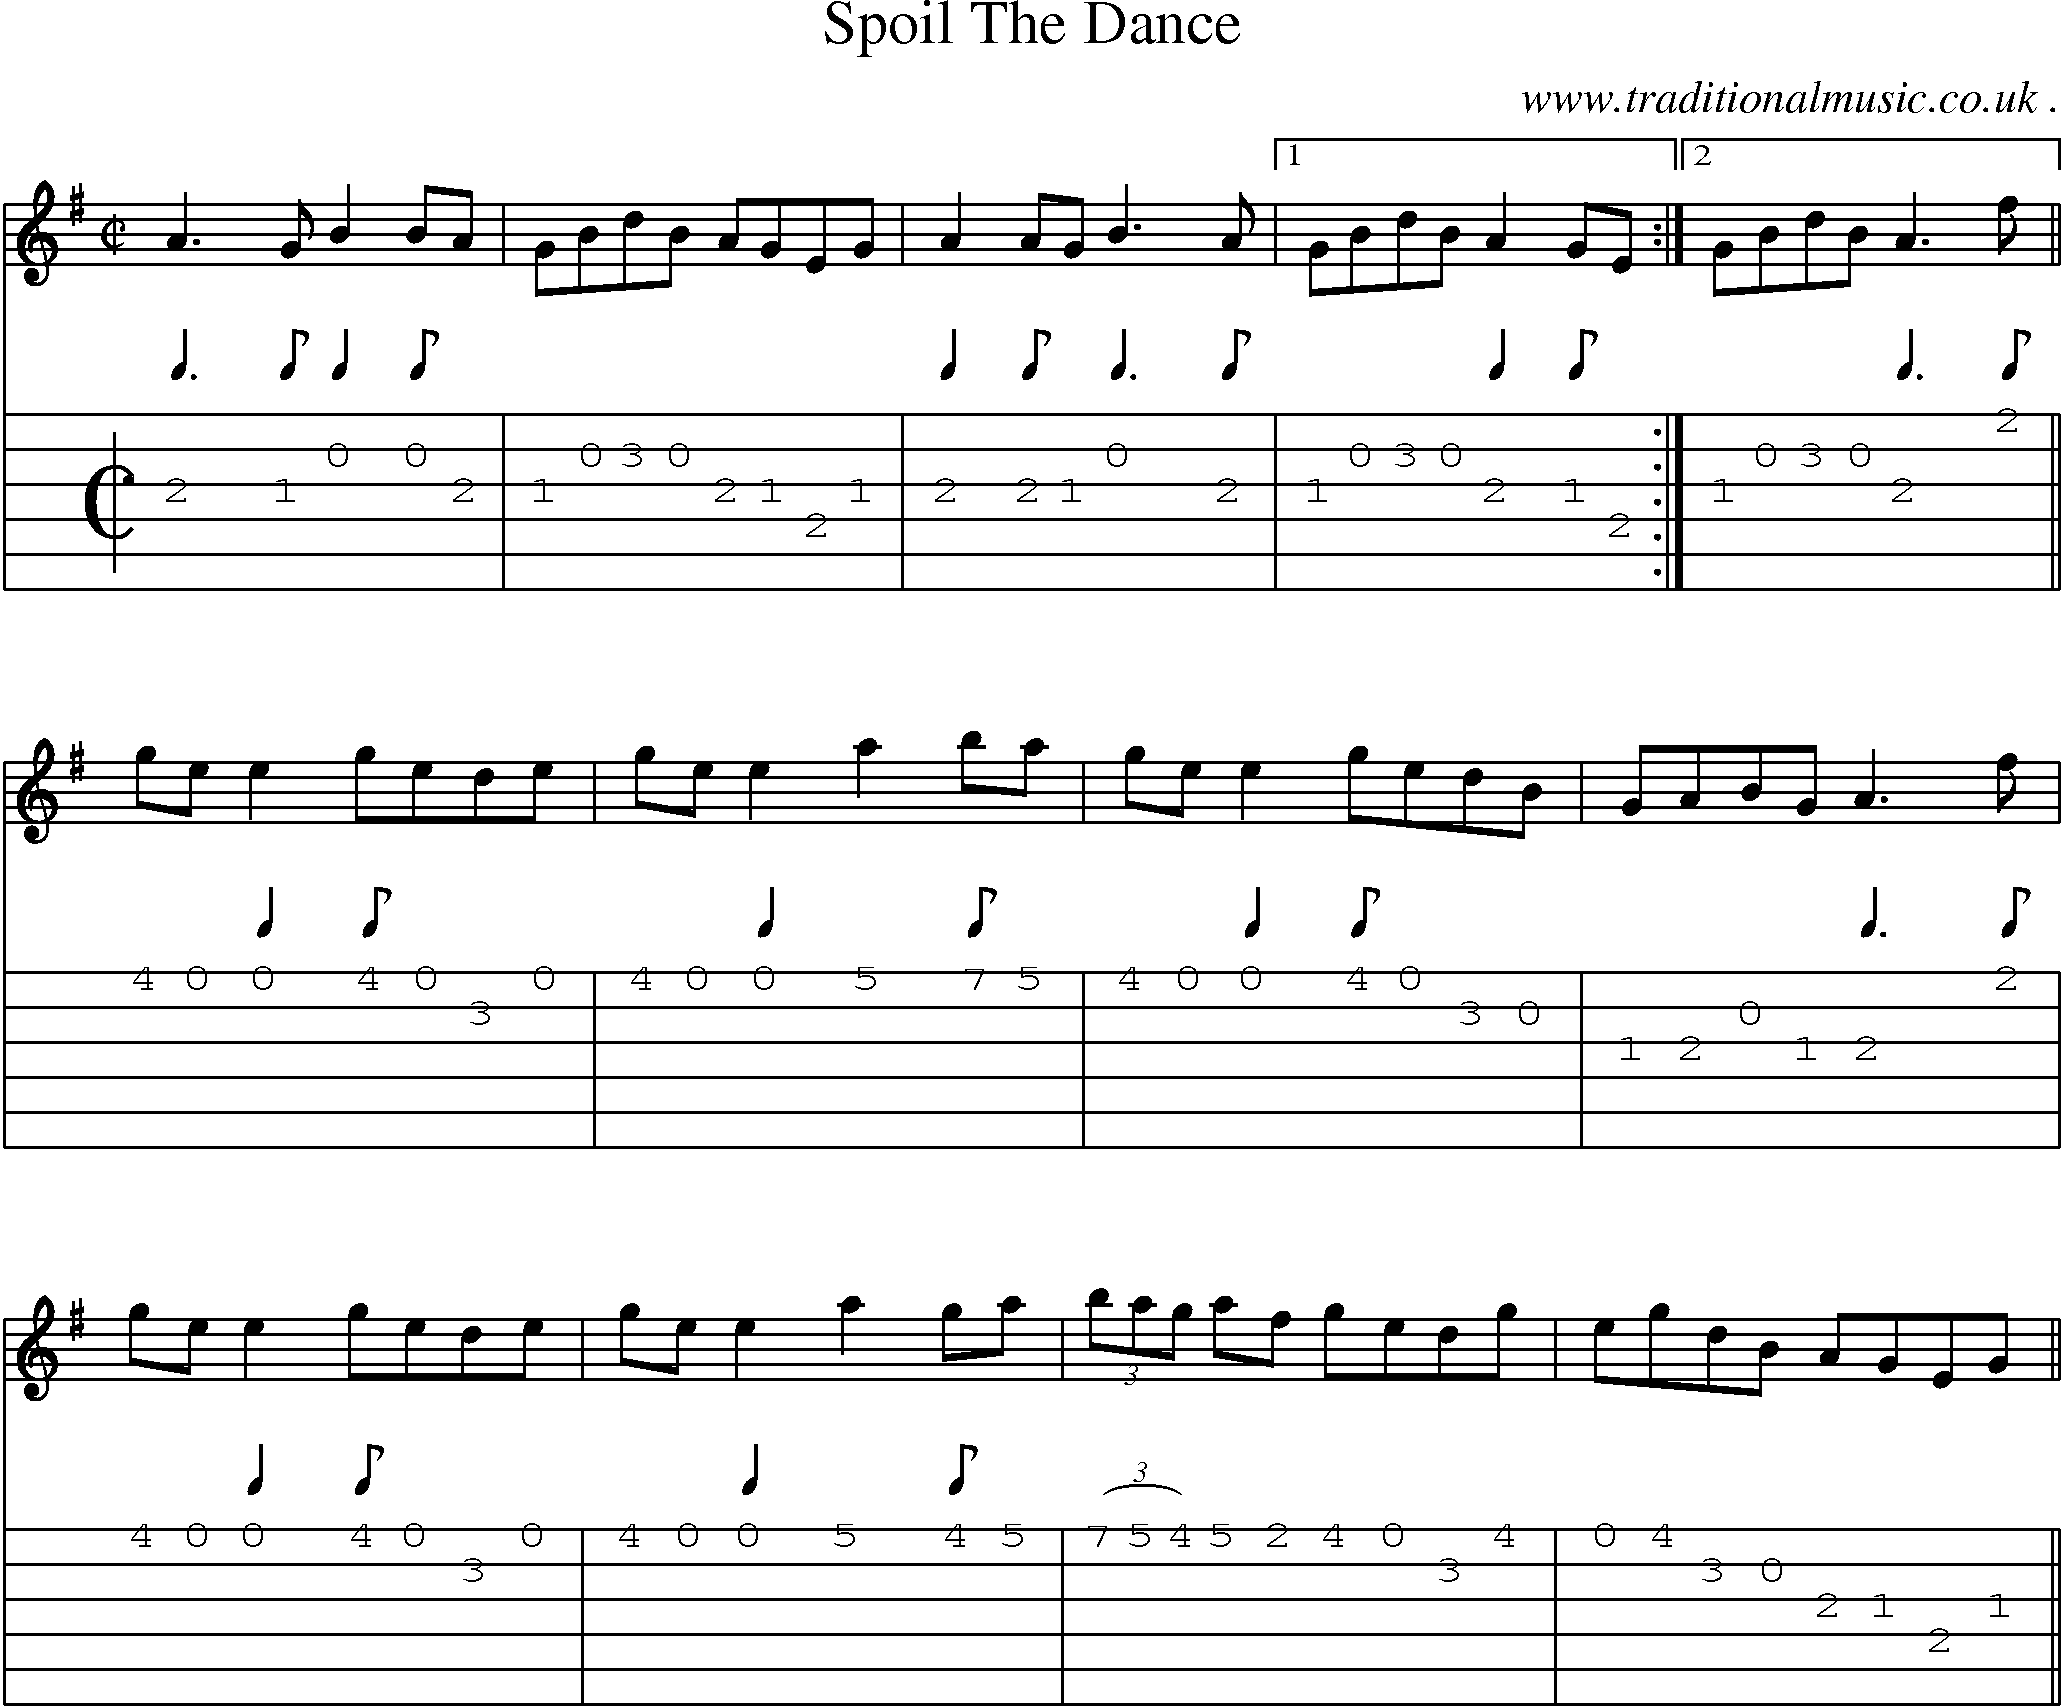 Sheet-Music and Guitar Tabs for Spoil The Dance